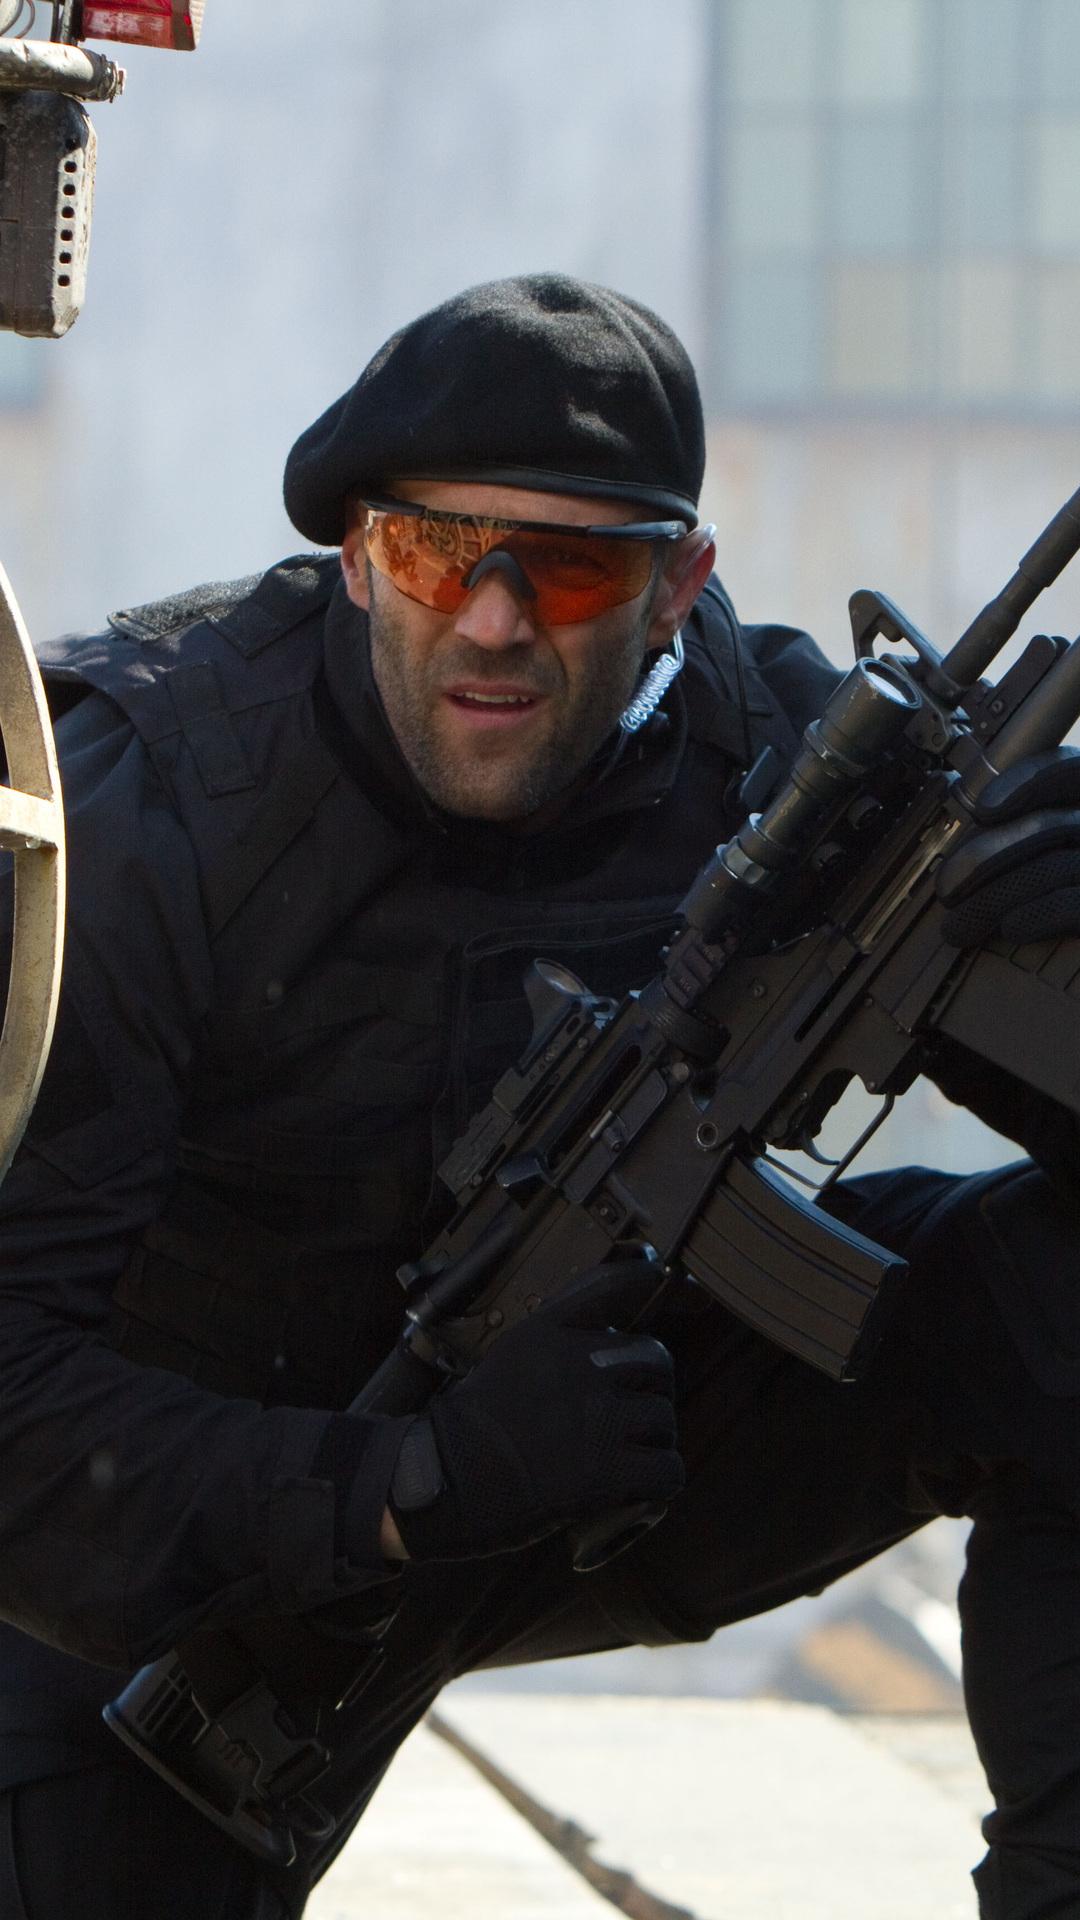 Jason statham training for expendables 2 torrent neighbours from hell 1 download utorrent movies